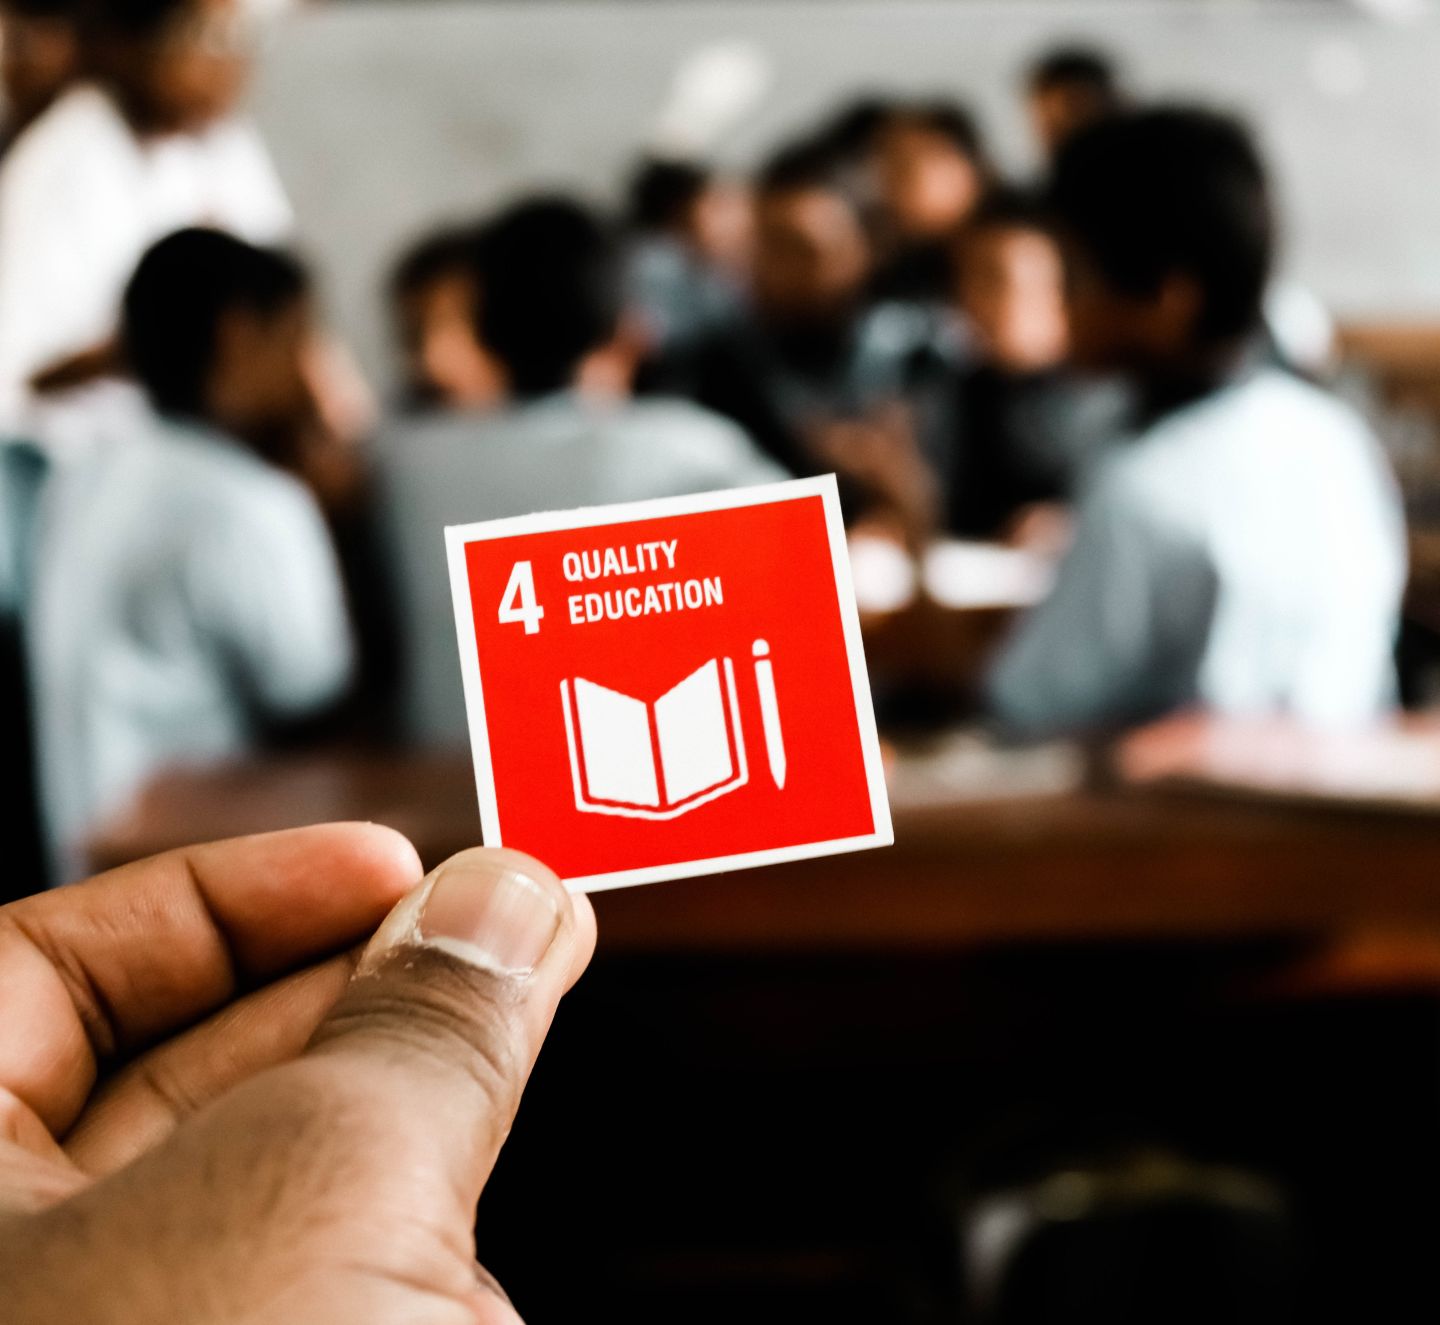 17 Goals to Rule Them All: How the SDGs Can Benefit Organisations